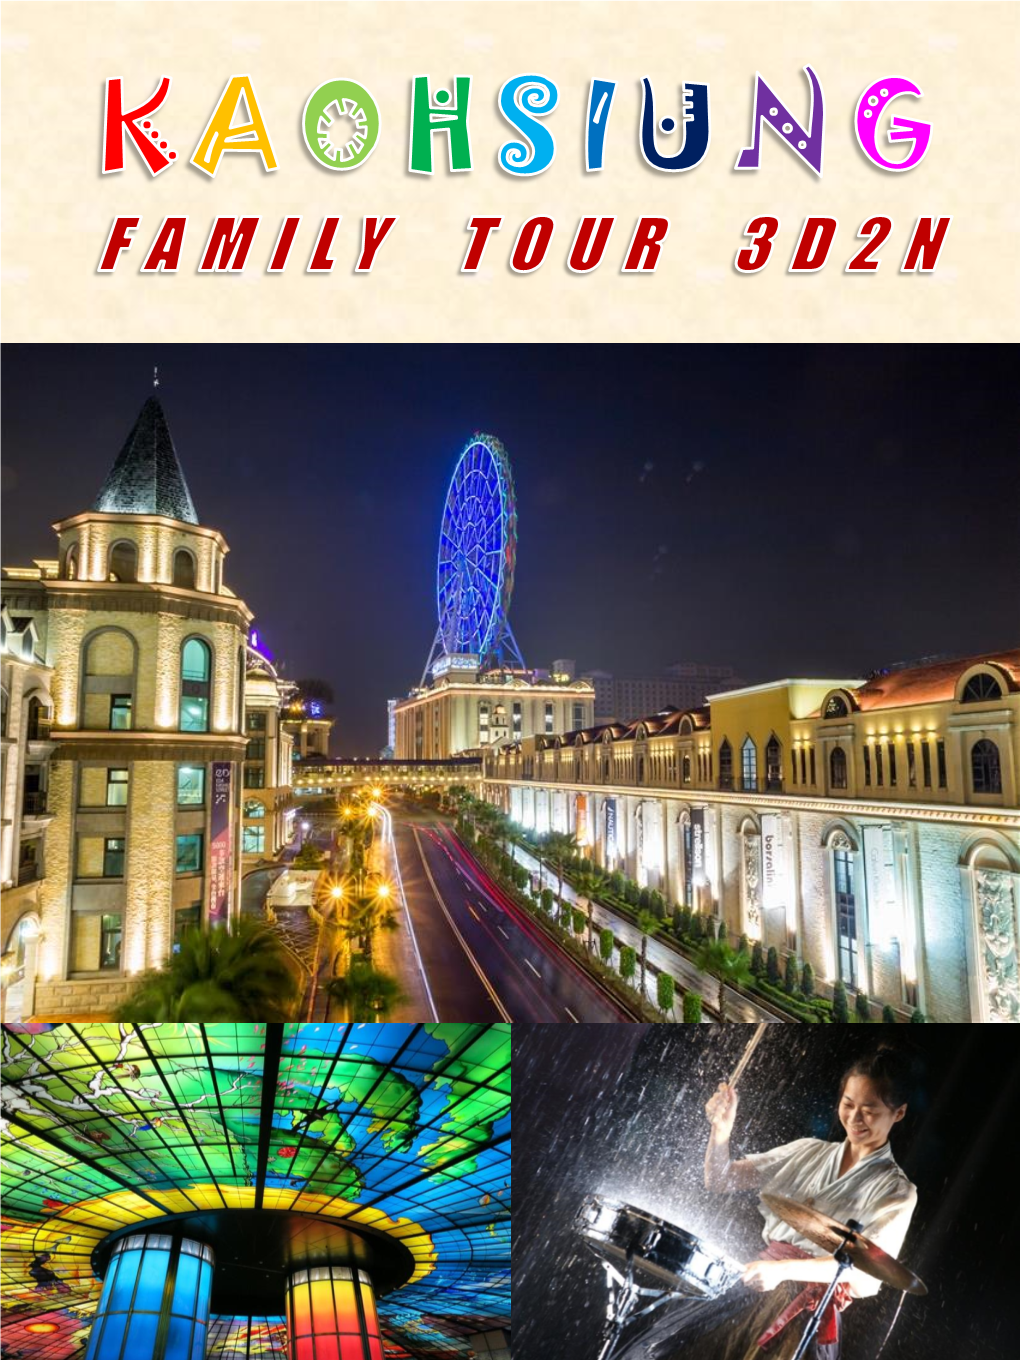 KAOHSIUNG FAMILY TOUR 3D2N 3Days 2 Nights